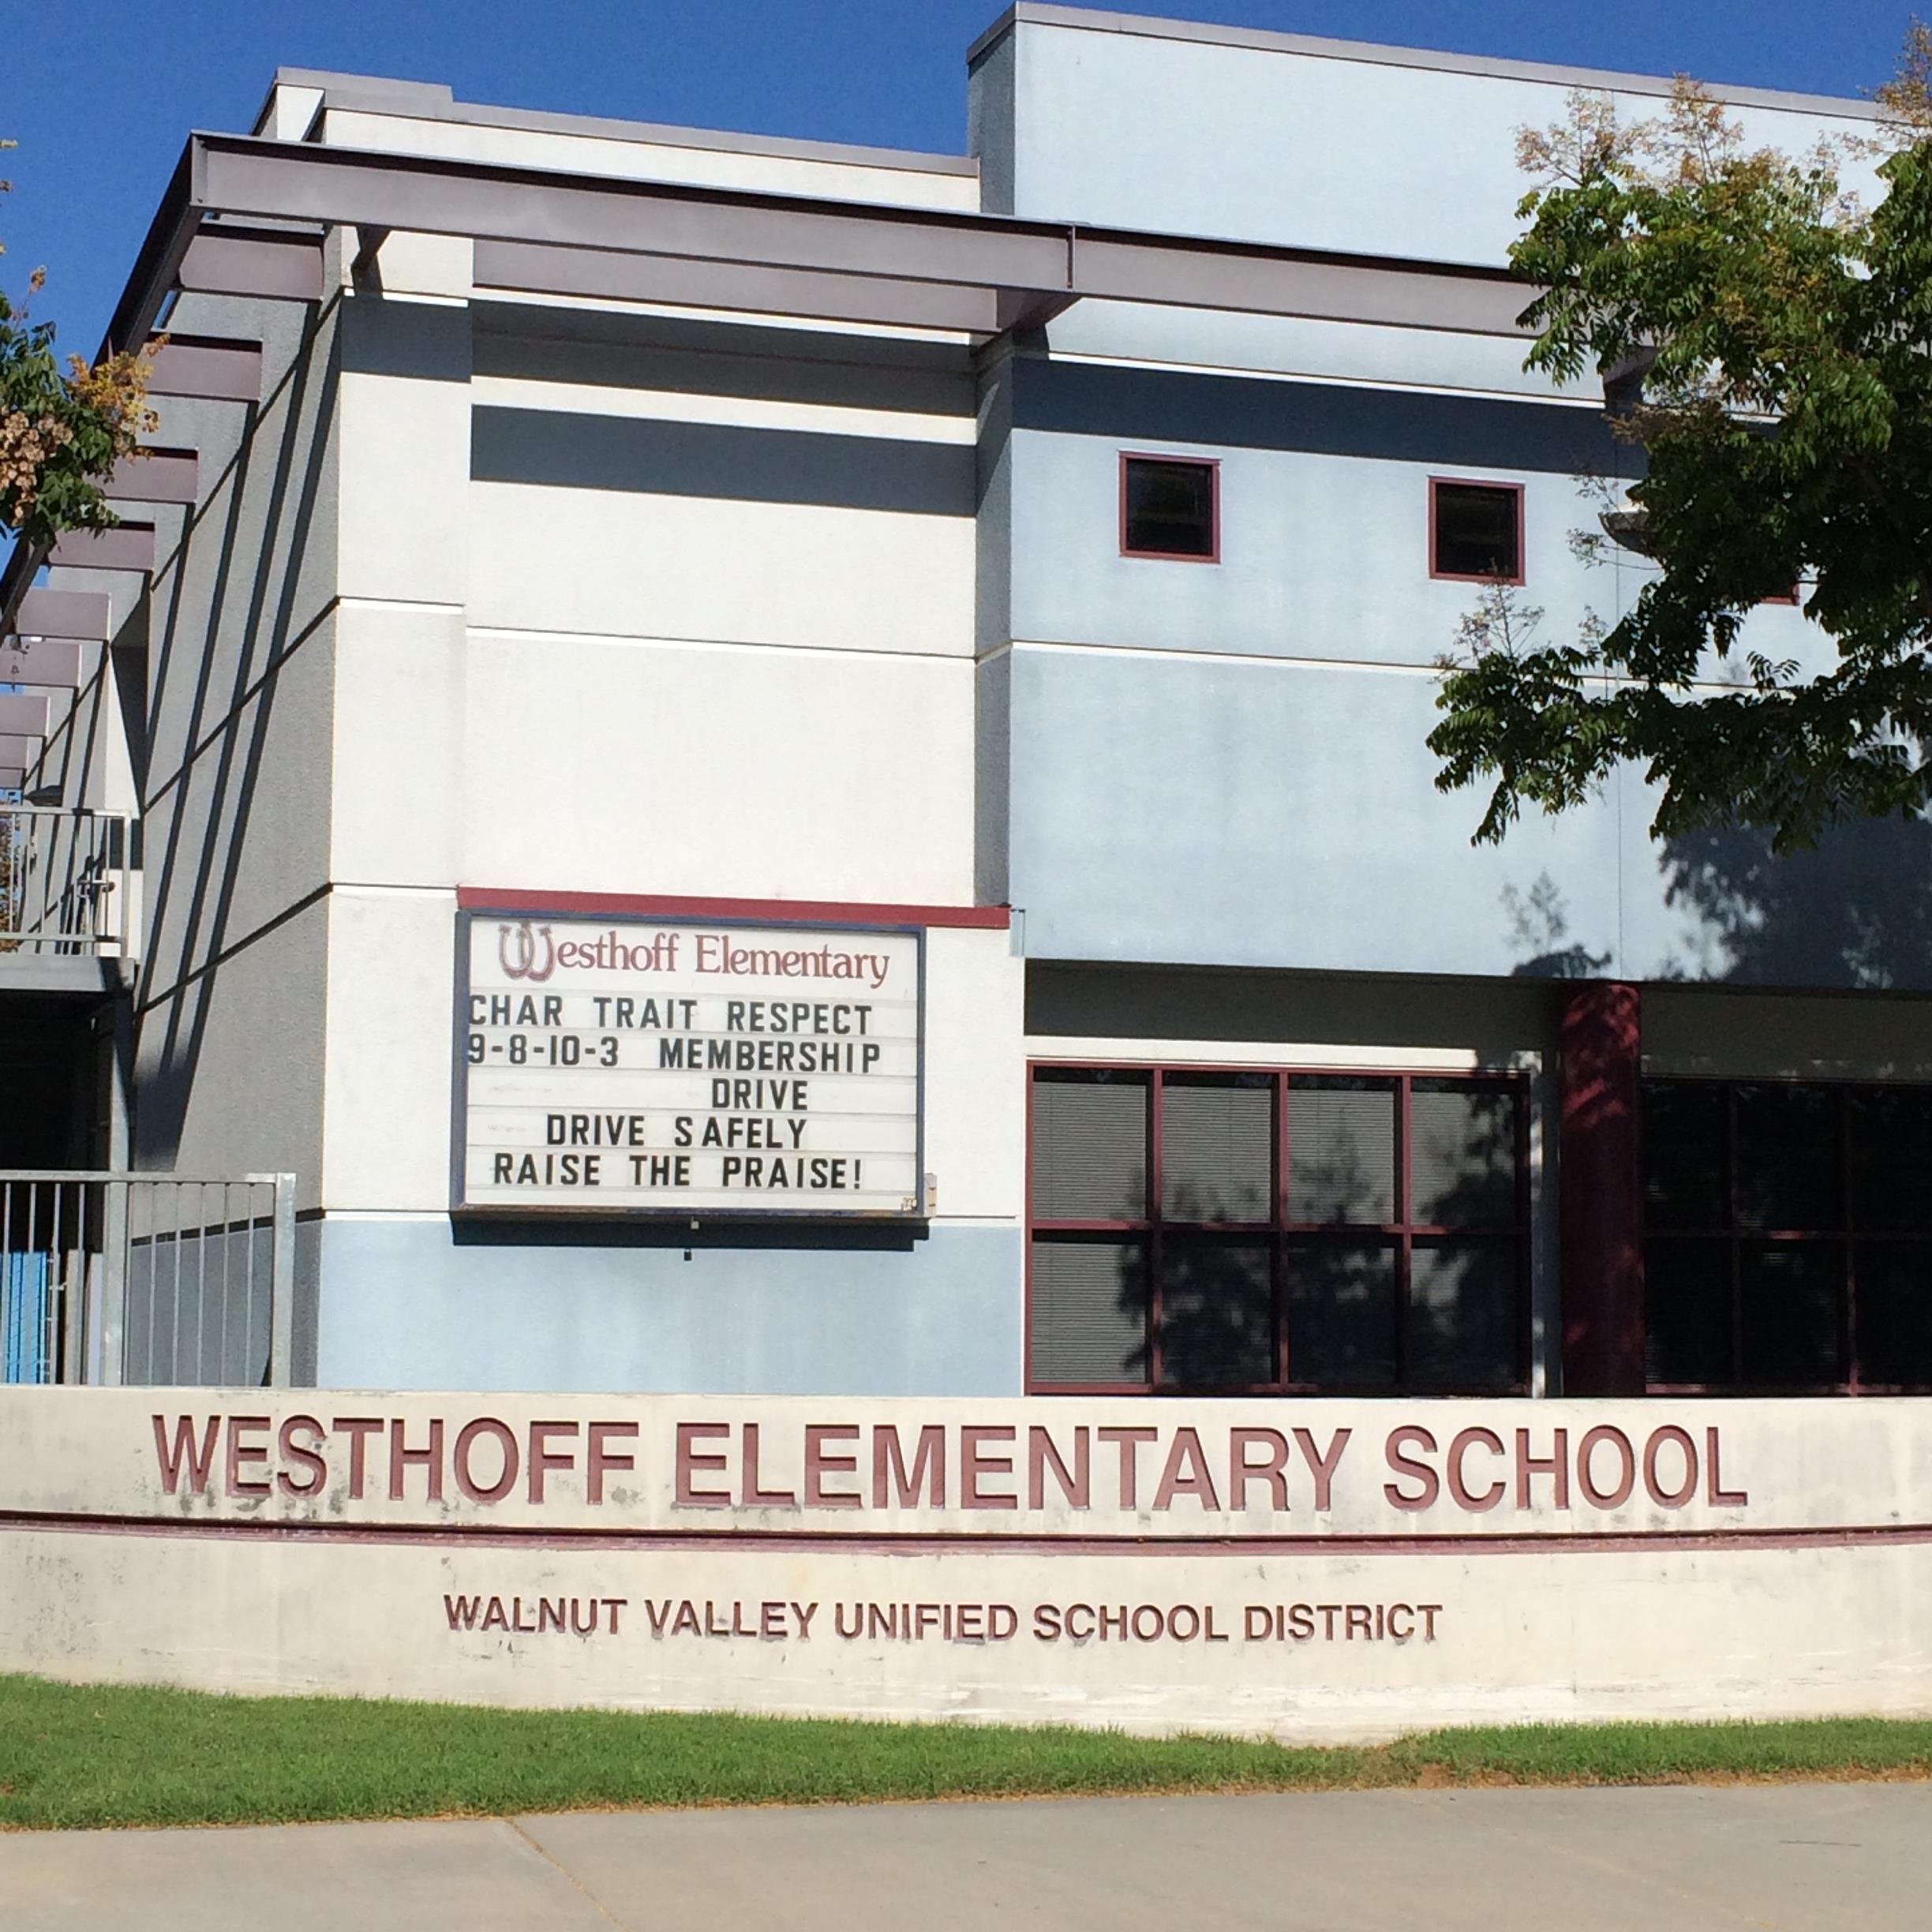 Westhoff Elementary School...             Where Kids Come First... Every Student, Every Day.